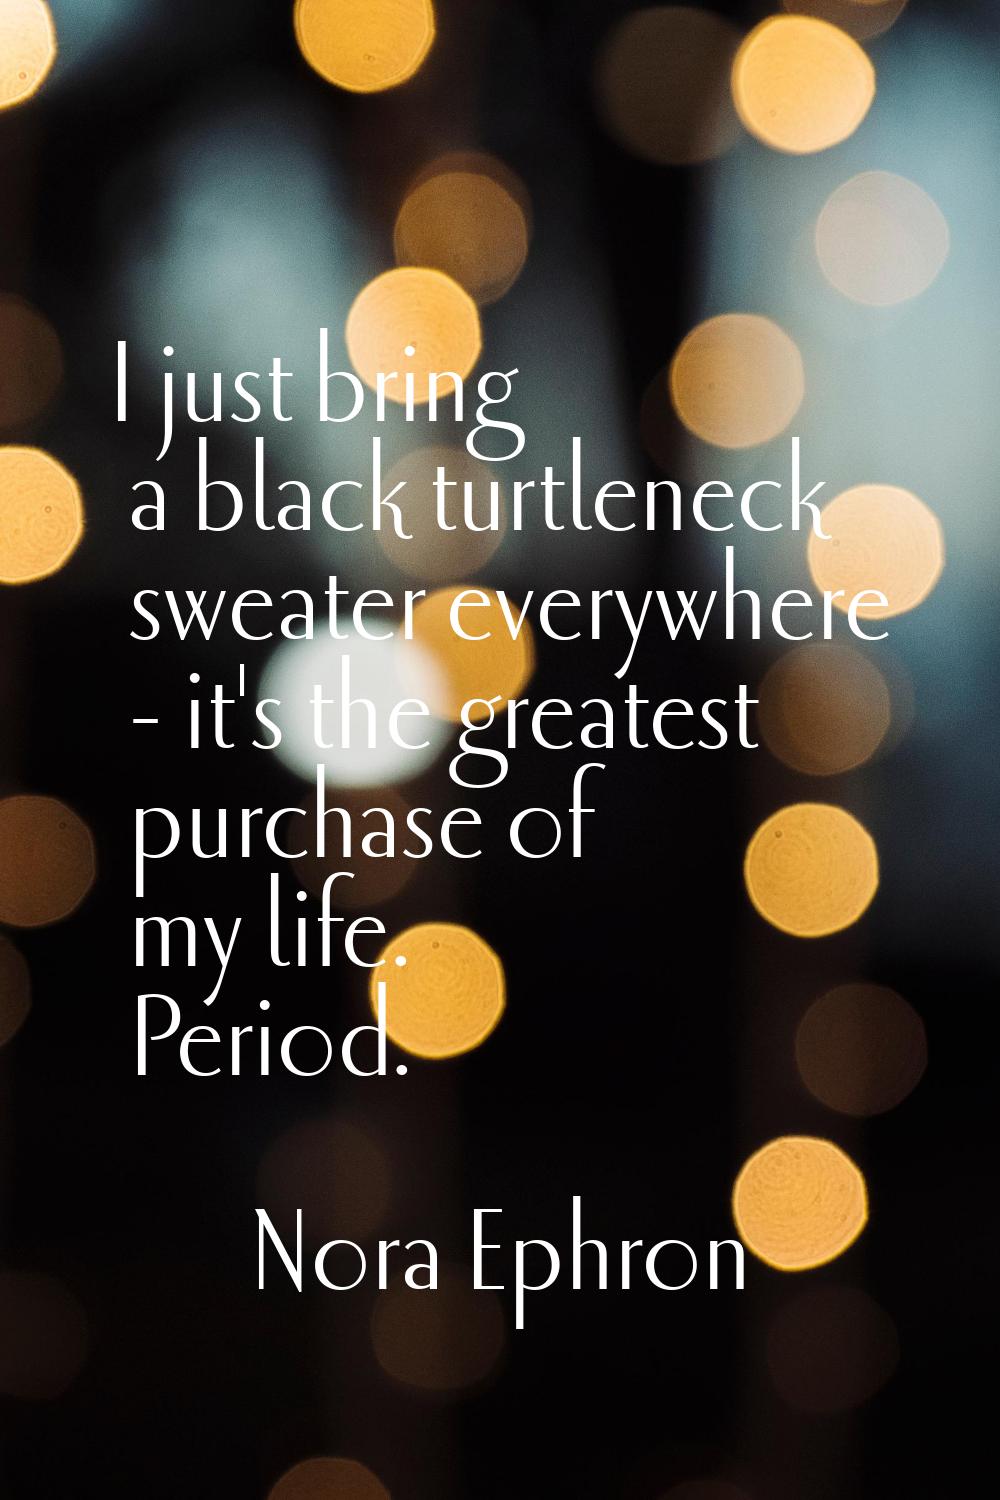 I just bring a black turtleneck sweater everywhere - it's the greatest purchase of my life. Period.